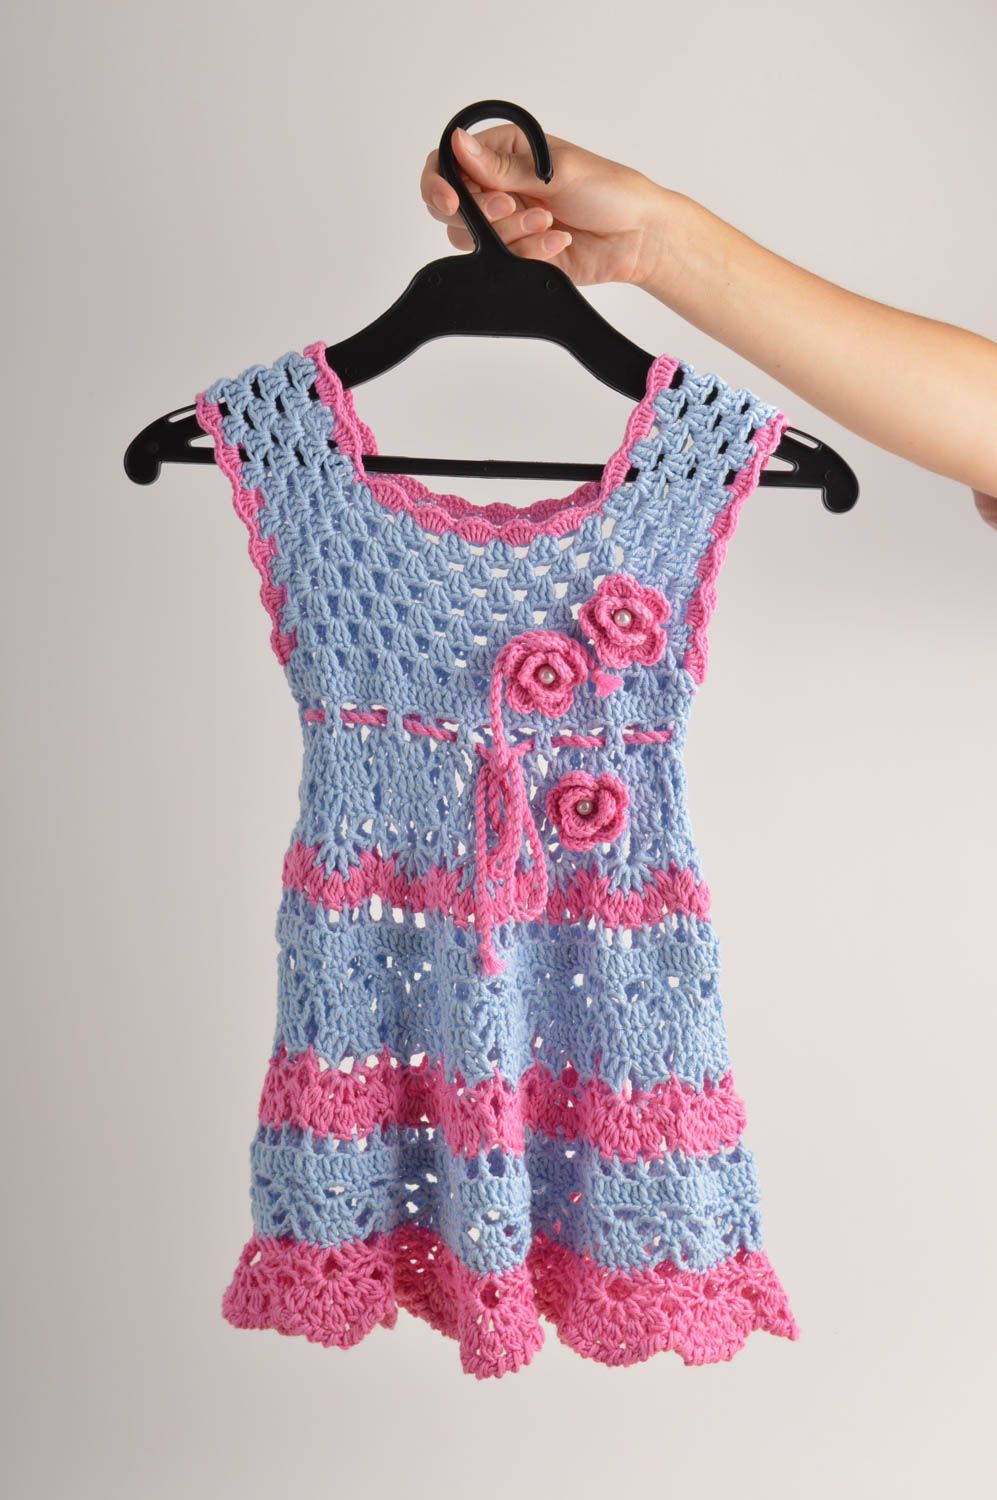 Unusual handmade crochet dress cute baby outfits designer clothes for kids photo 2